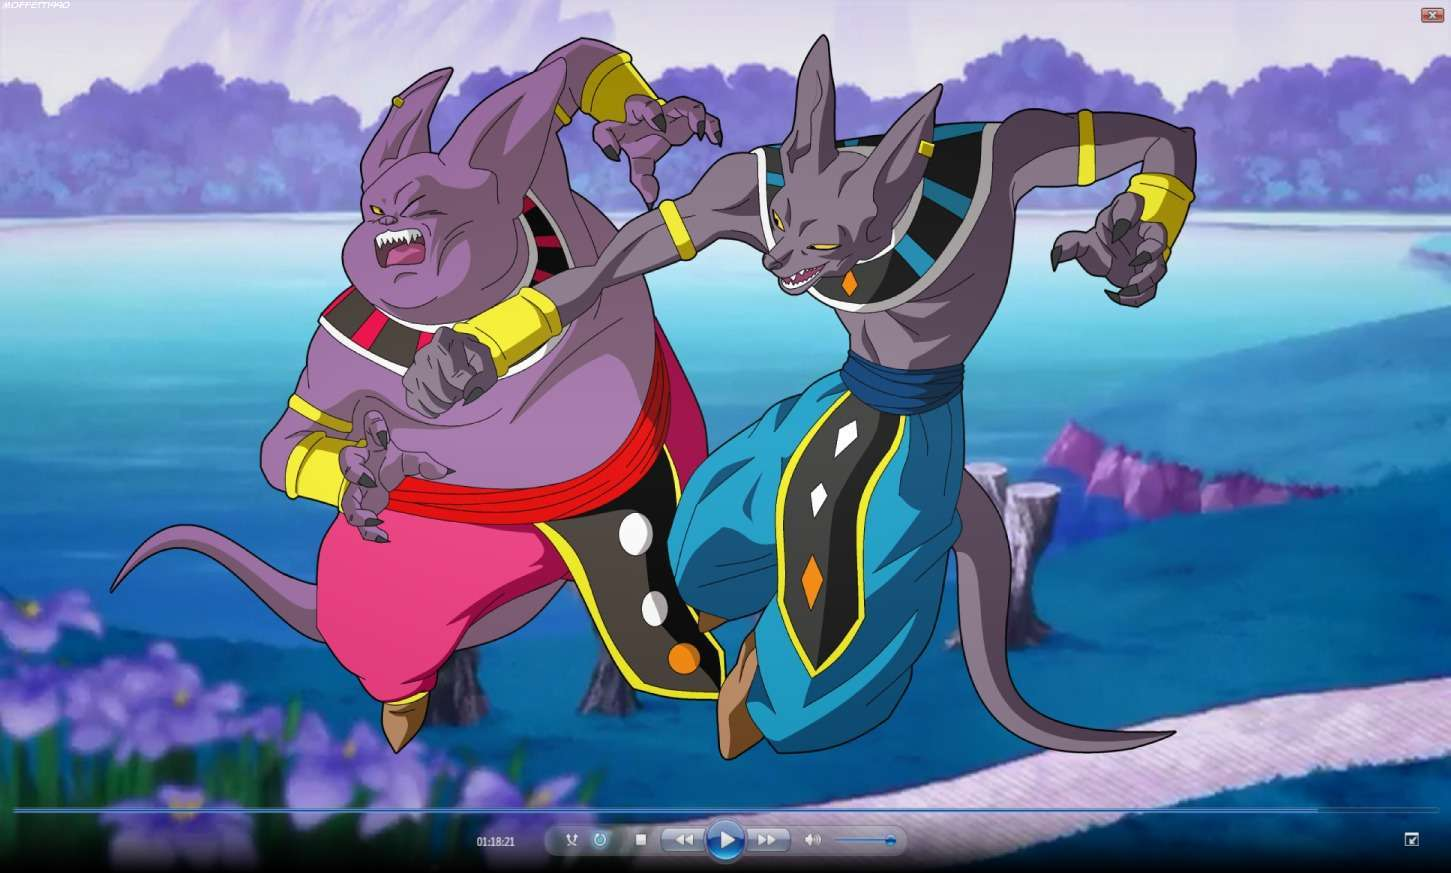 Is Champa stronger than Beerus in Dragon Ball Super?